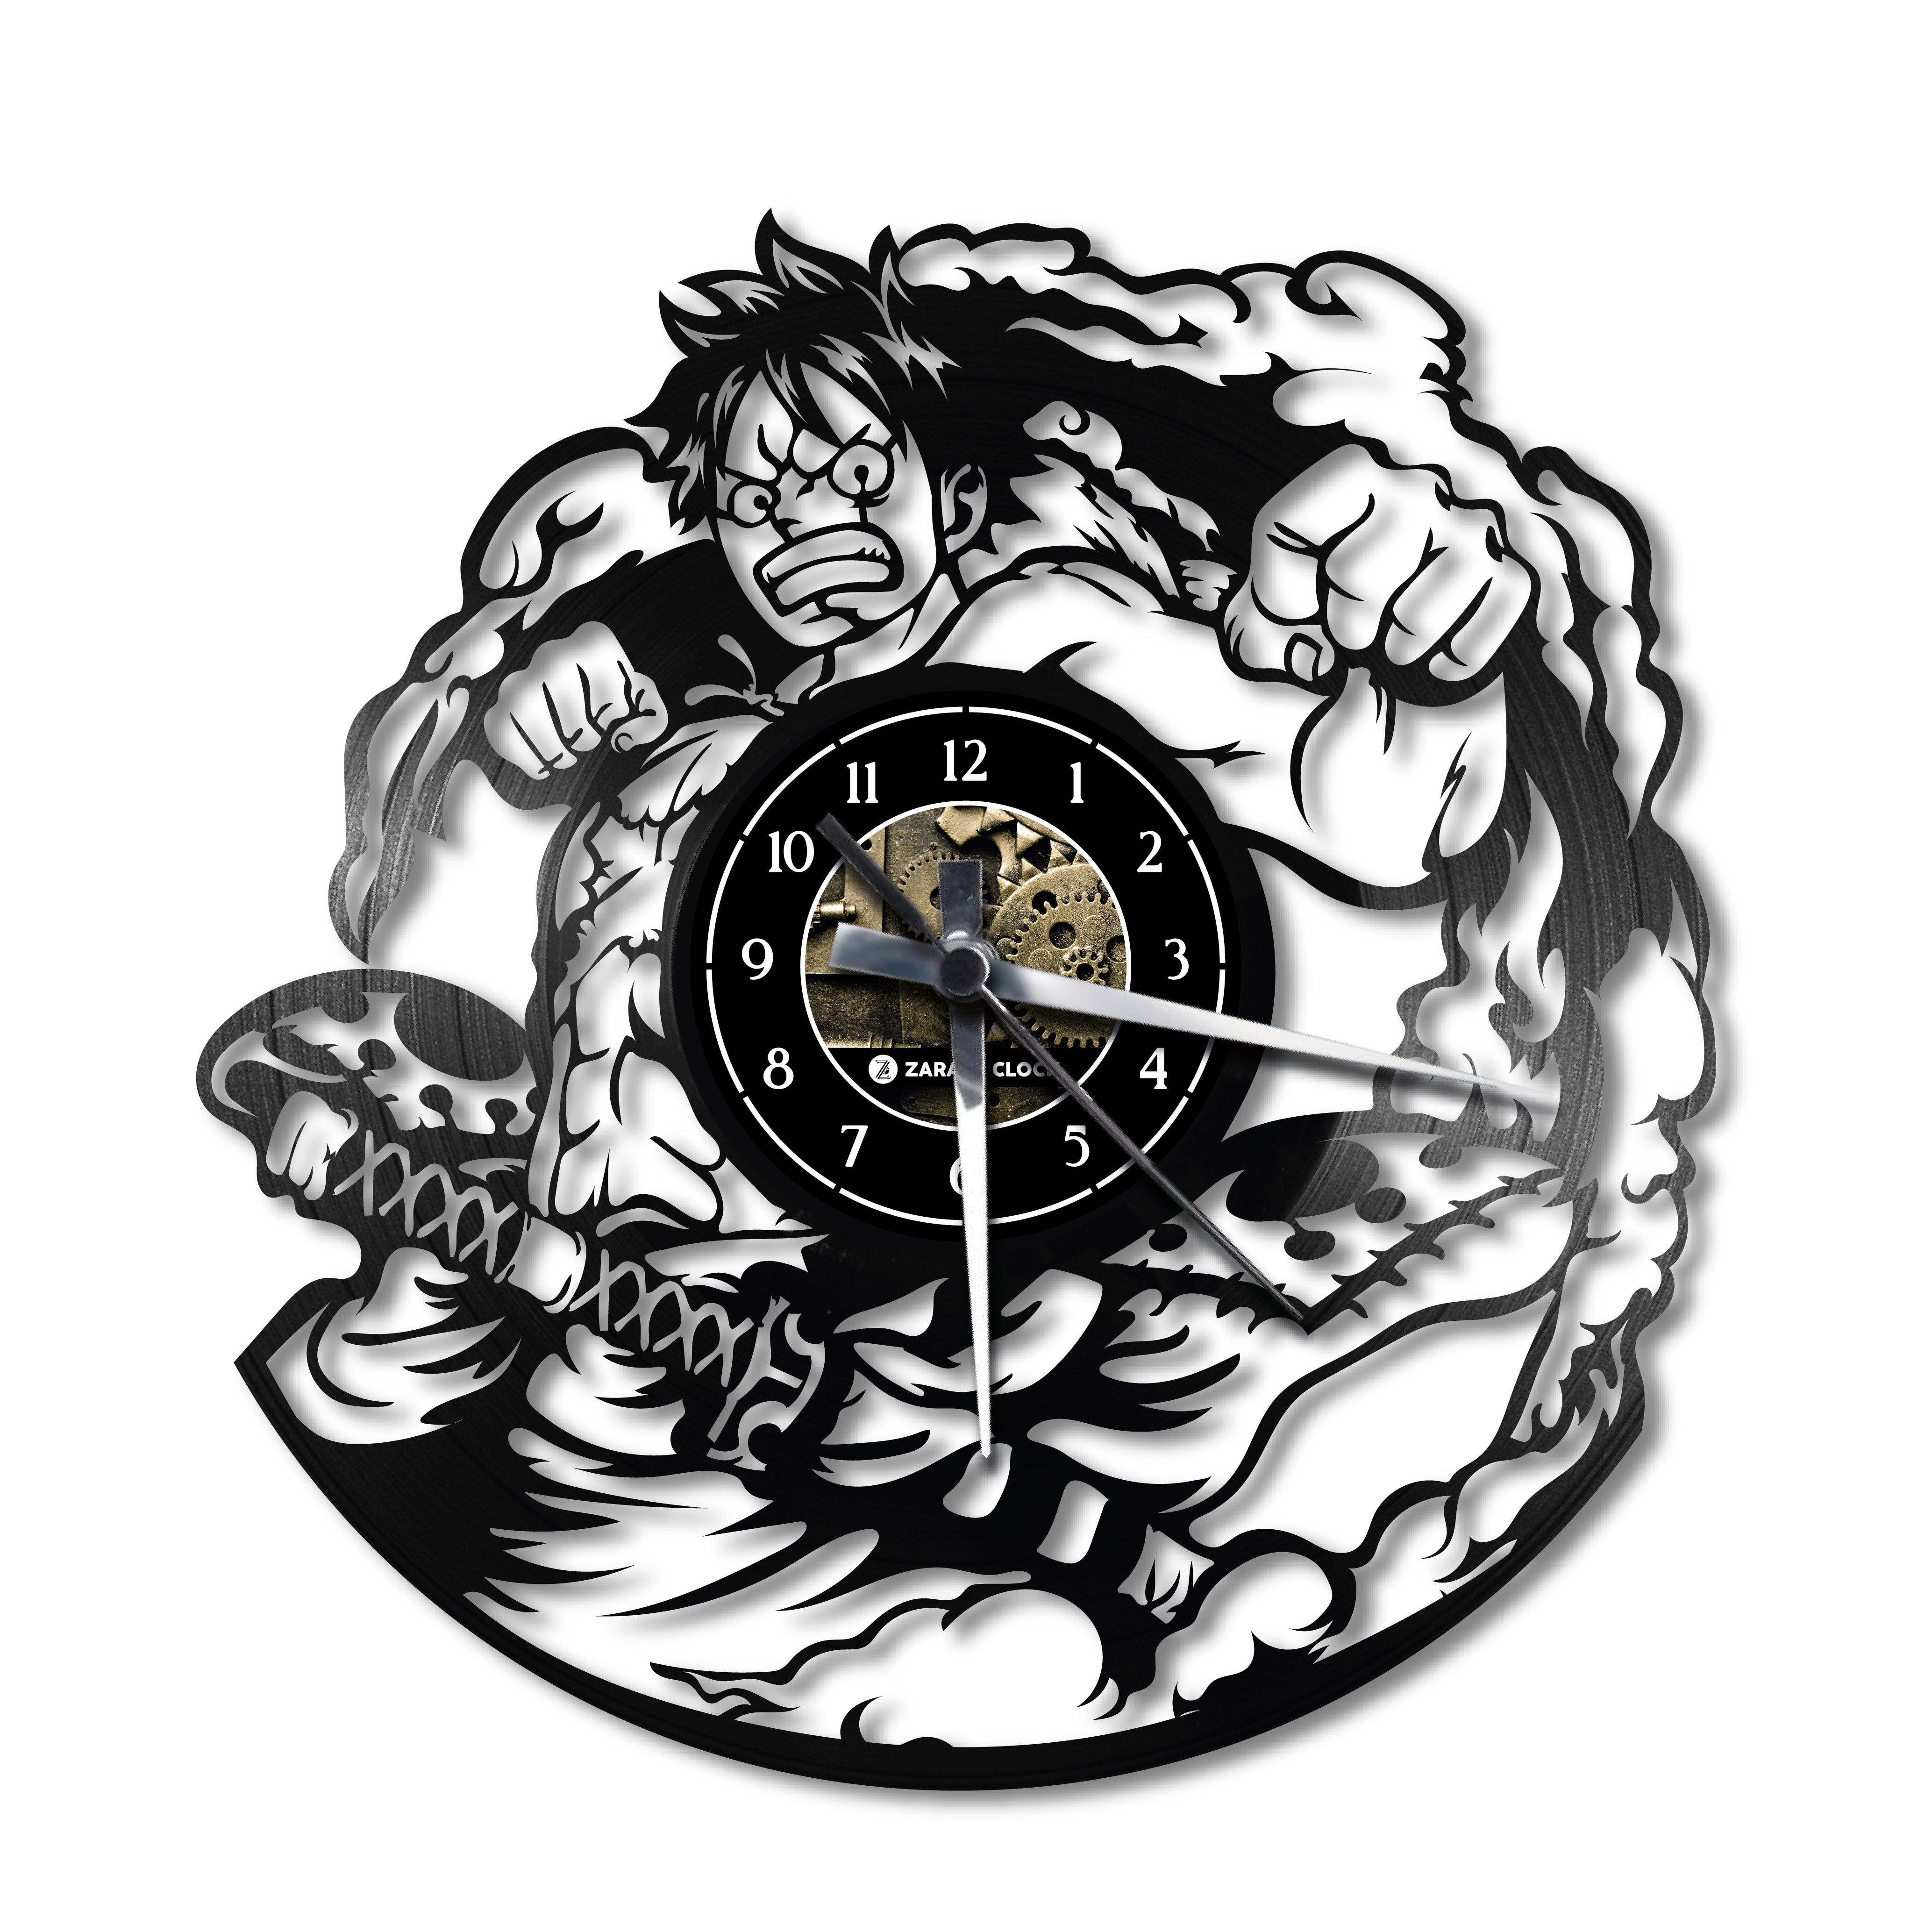 LUFFY-ONE PIECE ✦ orologio in vinile